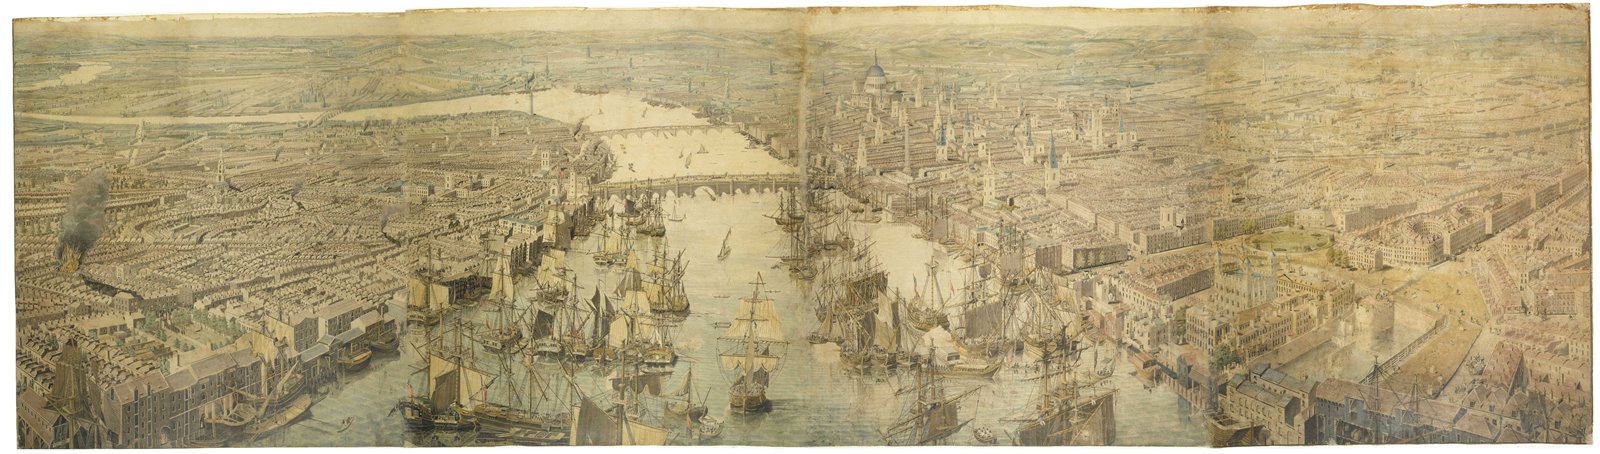 The 'Rhinebeck' Panorama (unknown British artist, 1806-07, watercolour on four sheets of paper) is a game changer when it comes to a bird’s-eye view of London. (ID no.: 98.57)